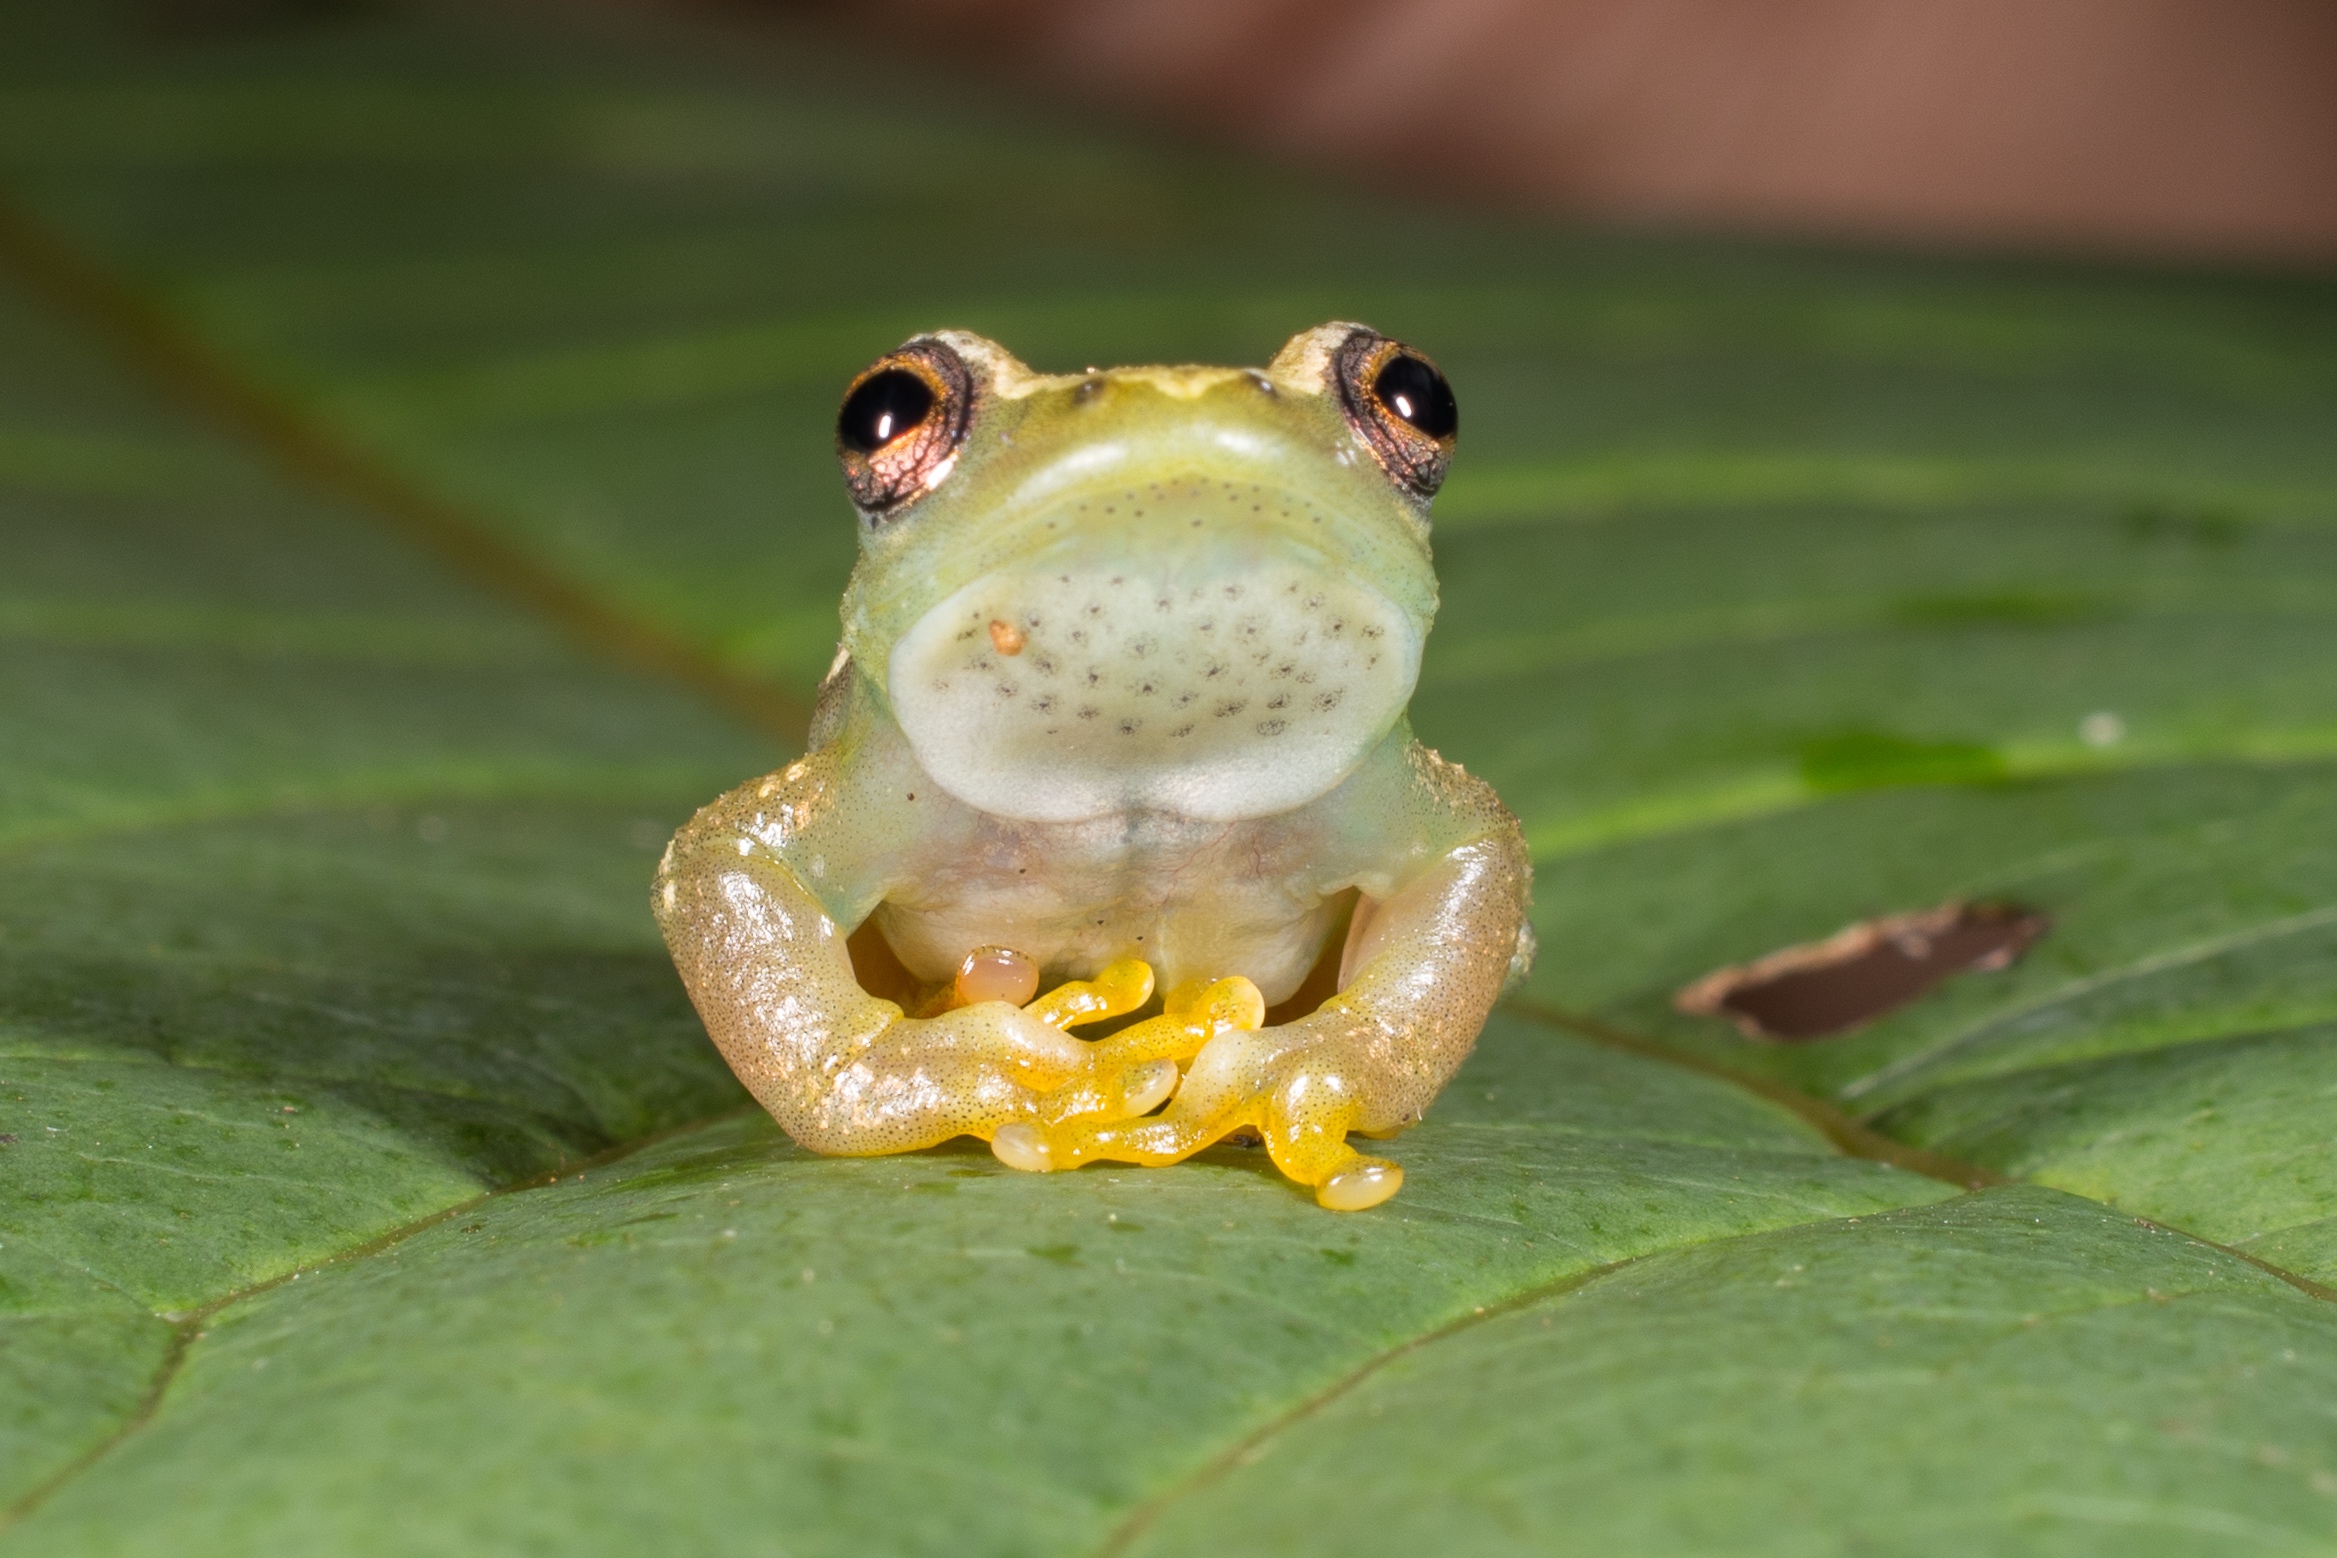 A photo of a new species of voiceless frog, pictured here sitting on a leaf with hands politely clasped together. The frog is golden green with some silvery-gold mottling.